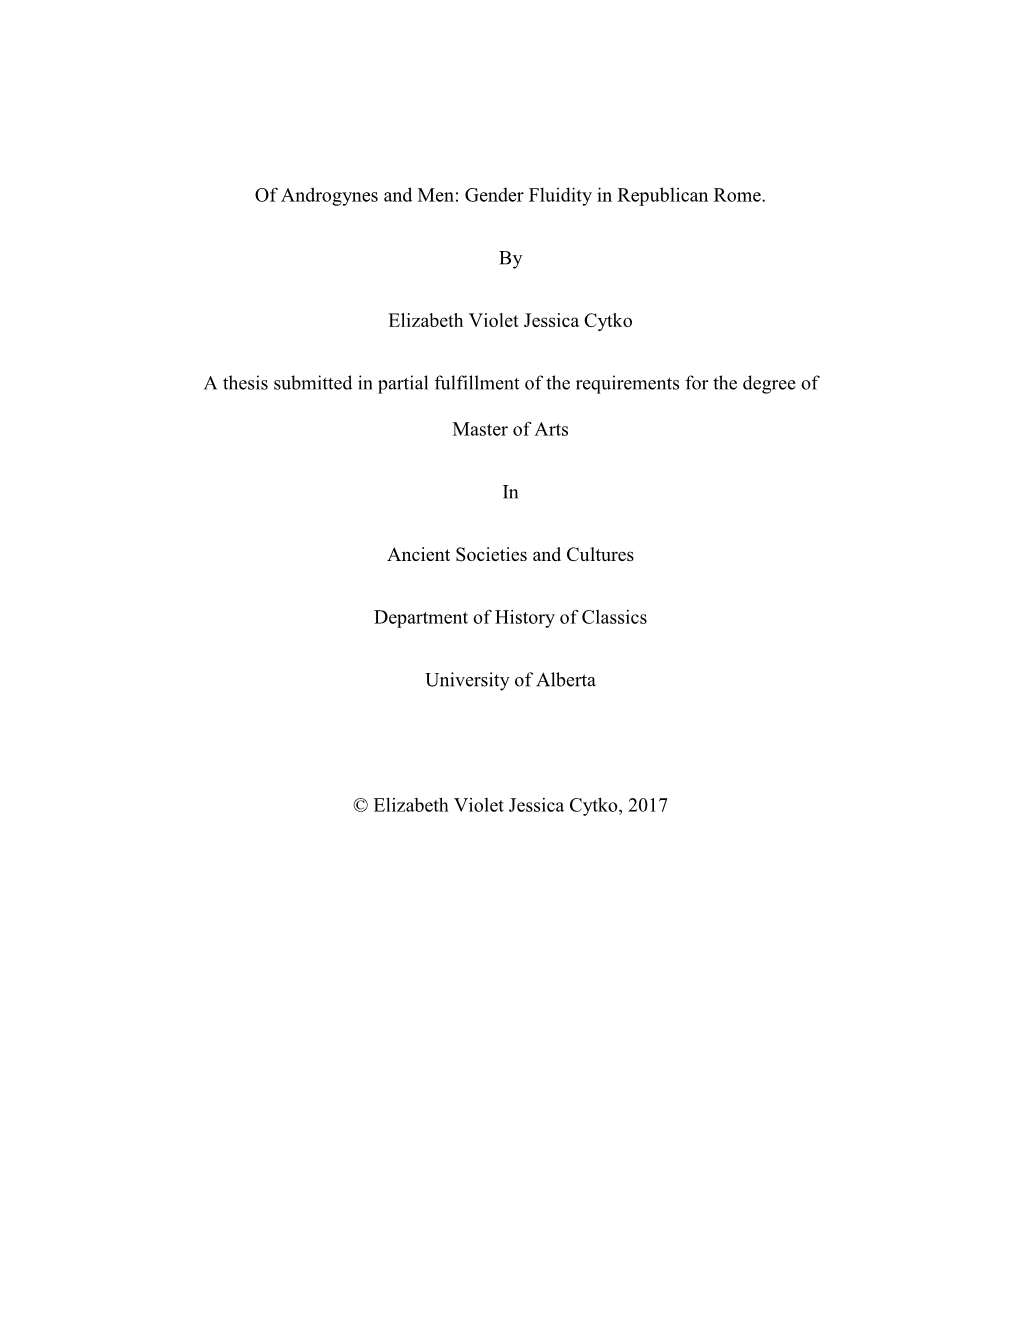 Gender Fluidity in Republican Rome. by Elizabeth Violet Jessica Cytko a Thesis Submitted in Partial Fulfi